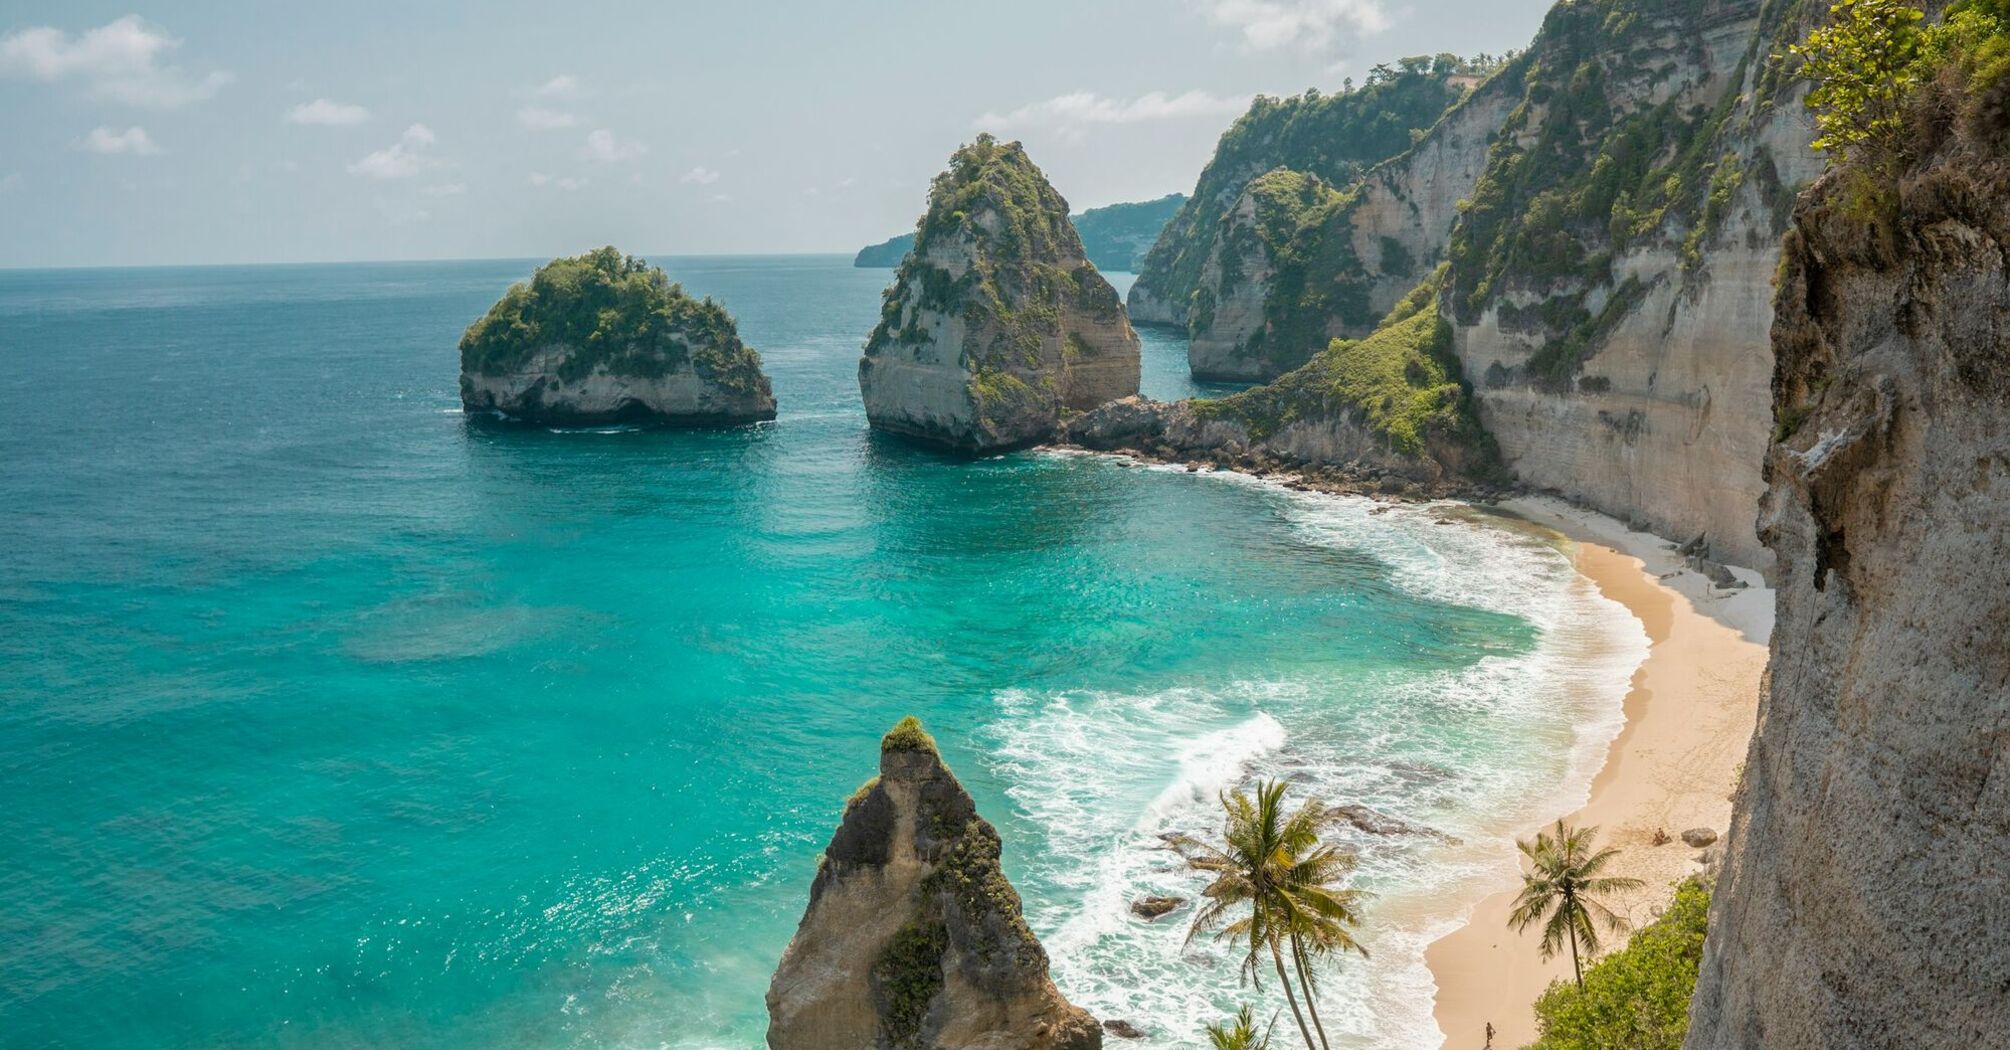 Stunning coastal view of Bali with clear turquoise water and rocky cliffs